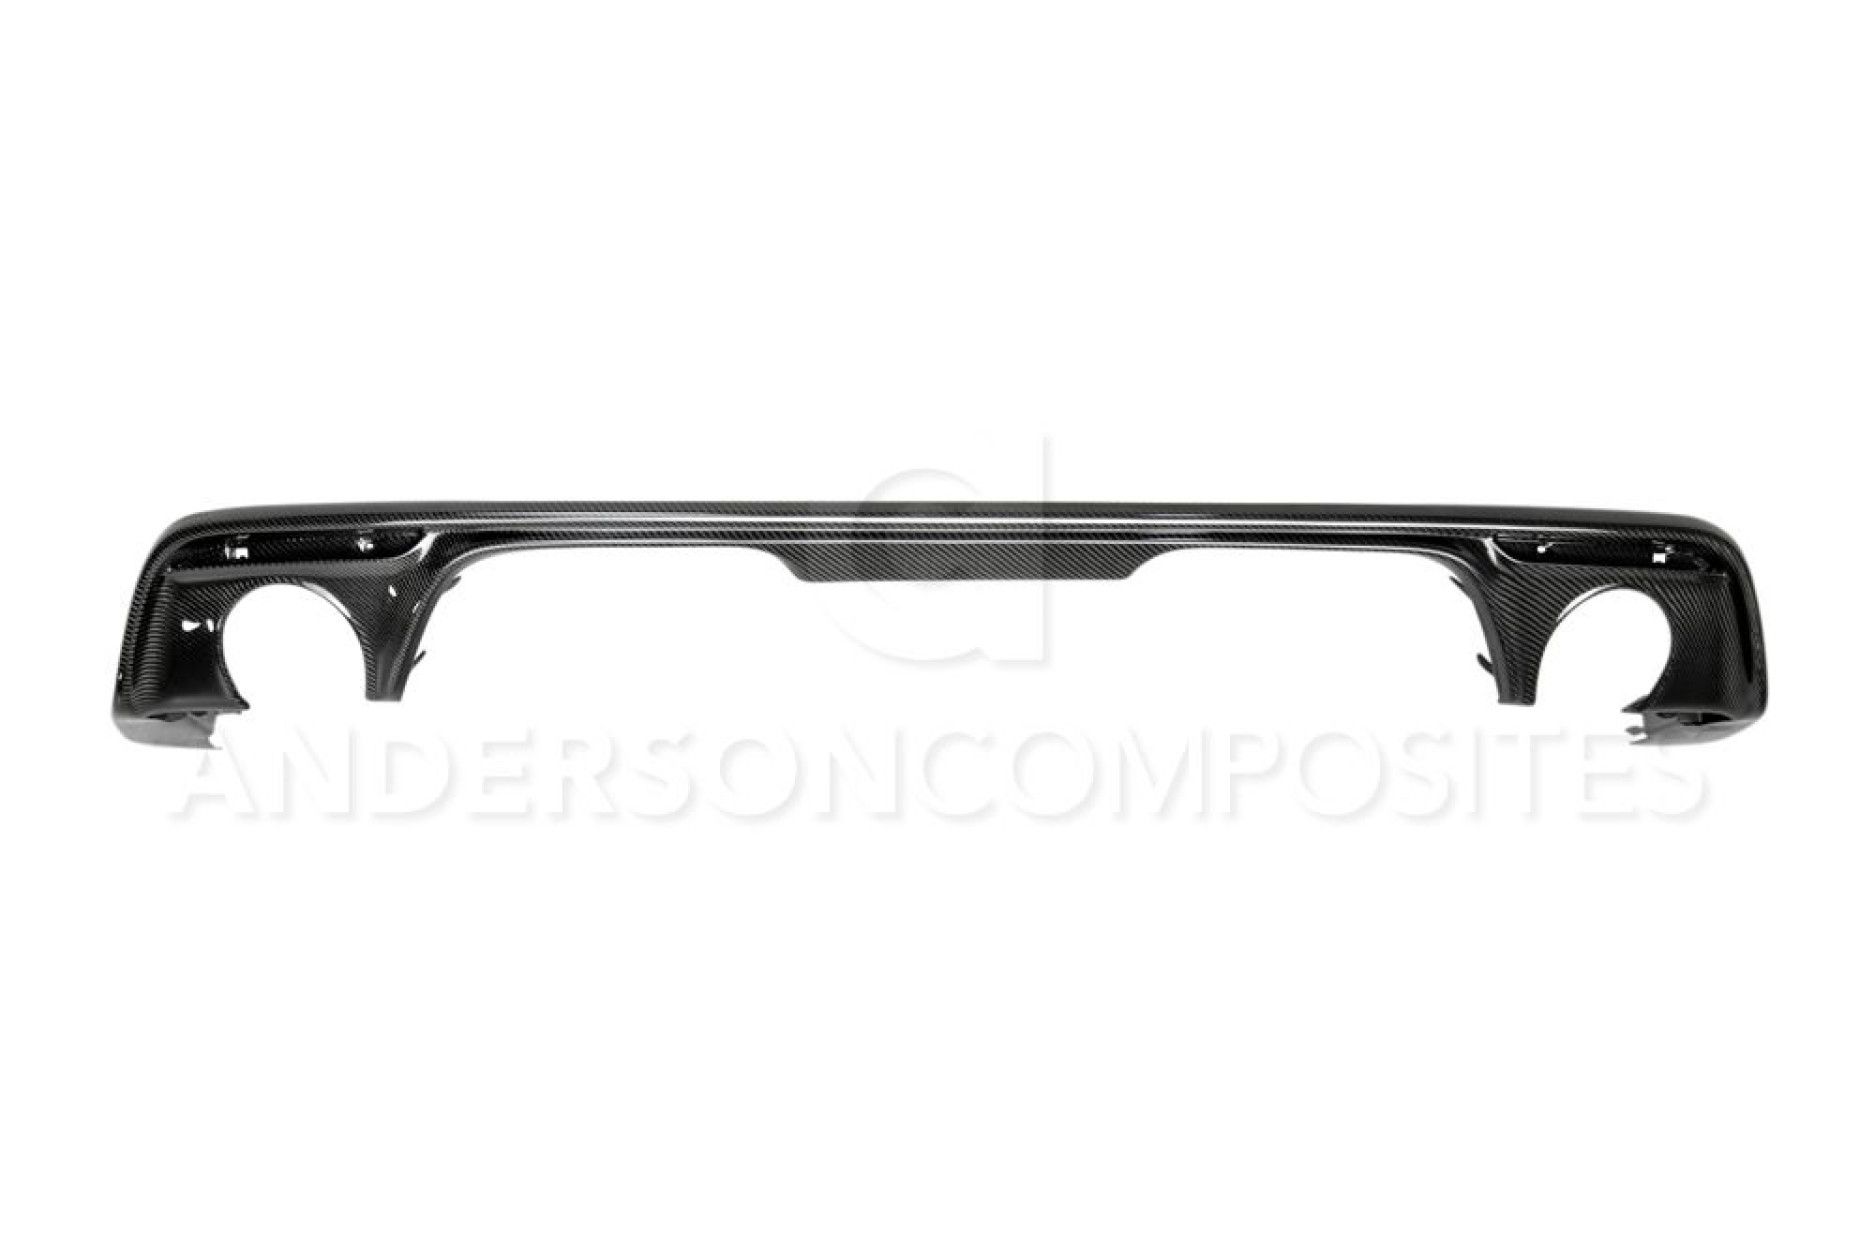 Anderson Composites Type-OE carbon fiber rear valance for 2015-2017 Ford Mustang (2) 